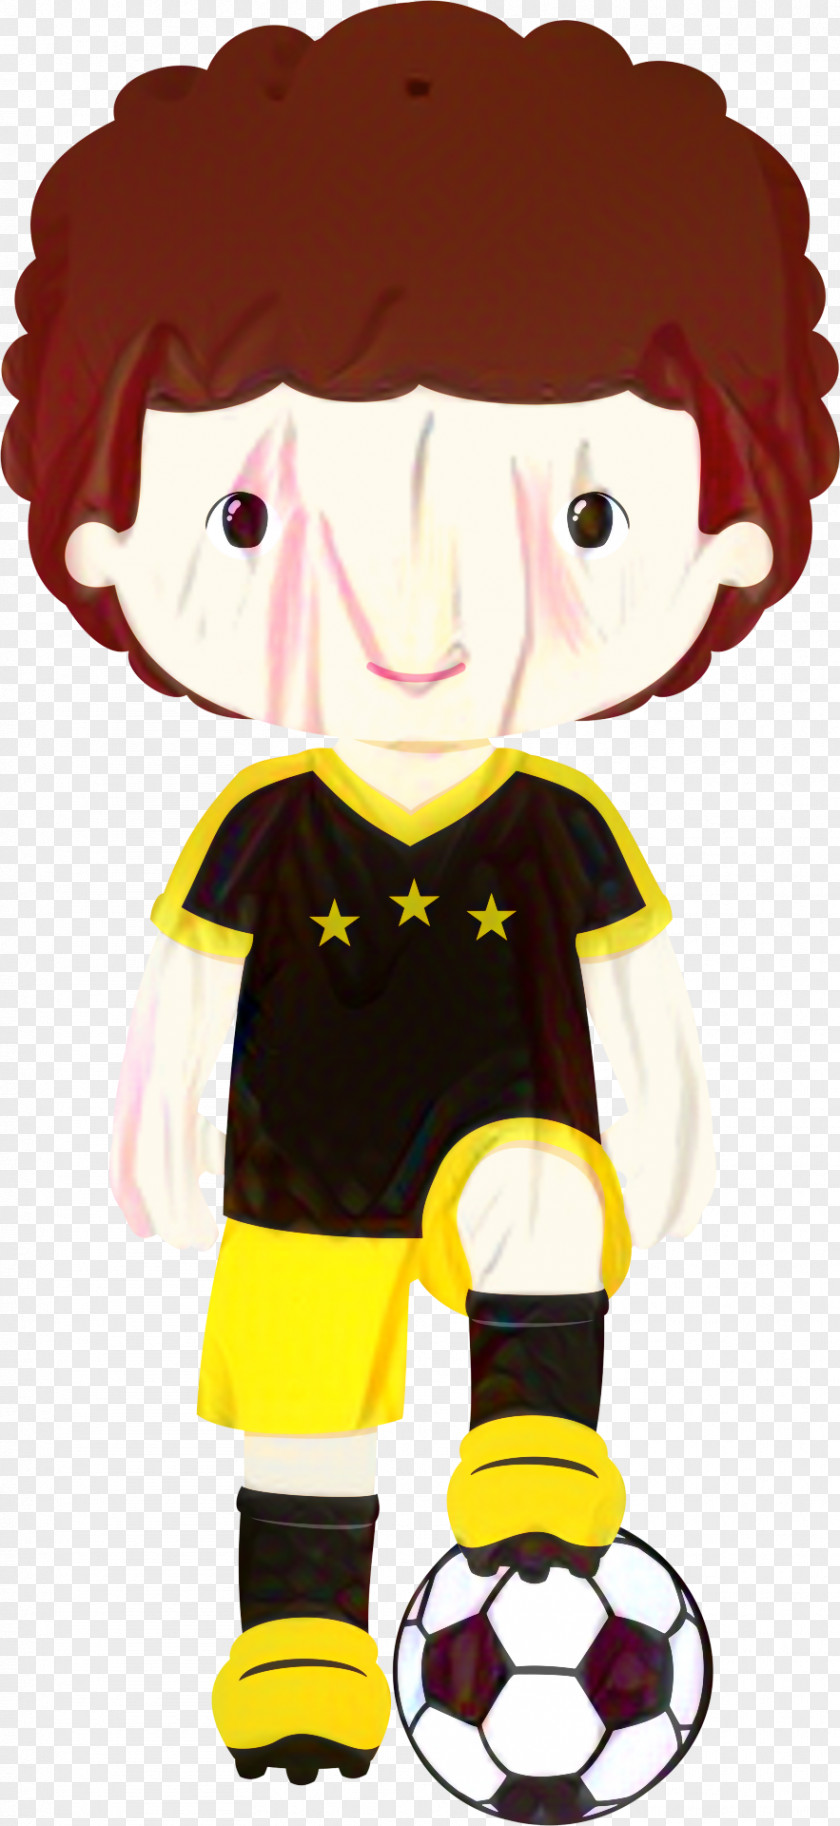 Style Animation Volleyball Cartoon PNG